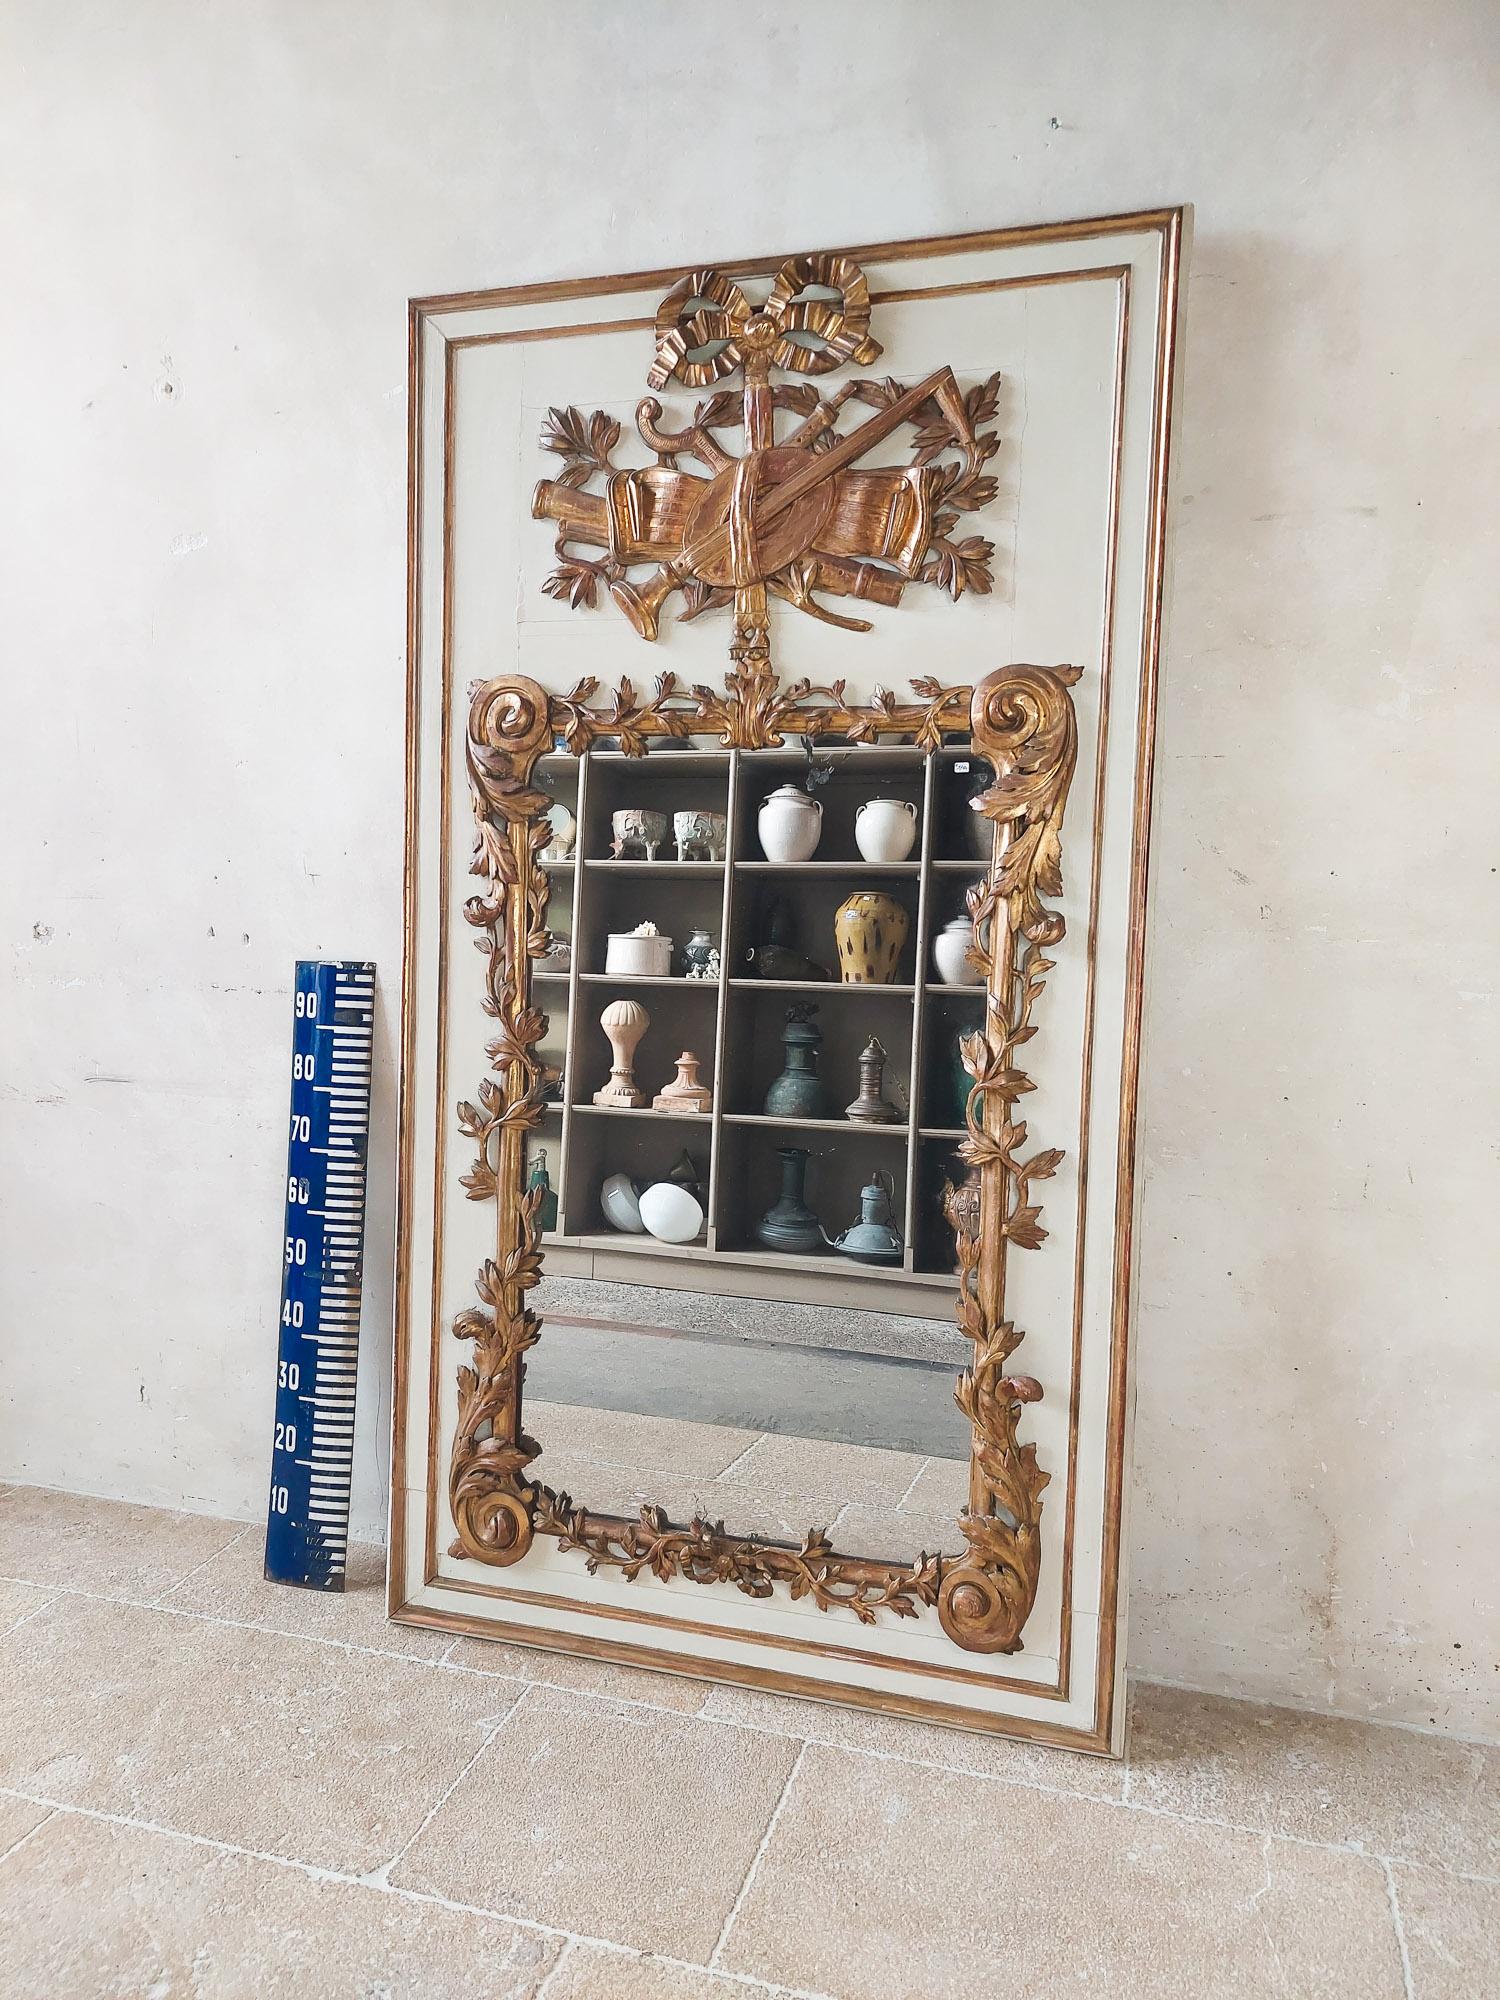 French 18th century giltwood trumeau mirror. Antique hand-carved basswood frame with white patina and gilded ornaments that fall in style in the transition of Louis the 15th and 16th.

The middle ornament depicting various musical instruments in